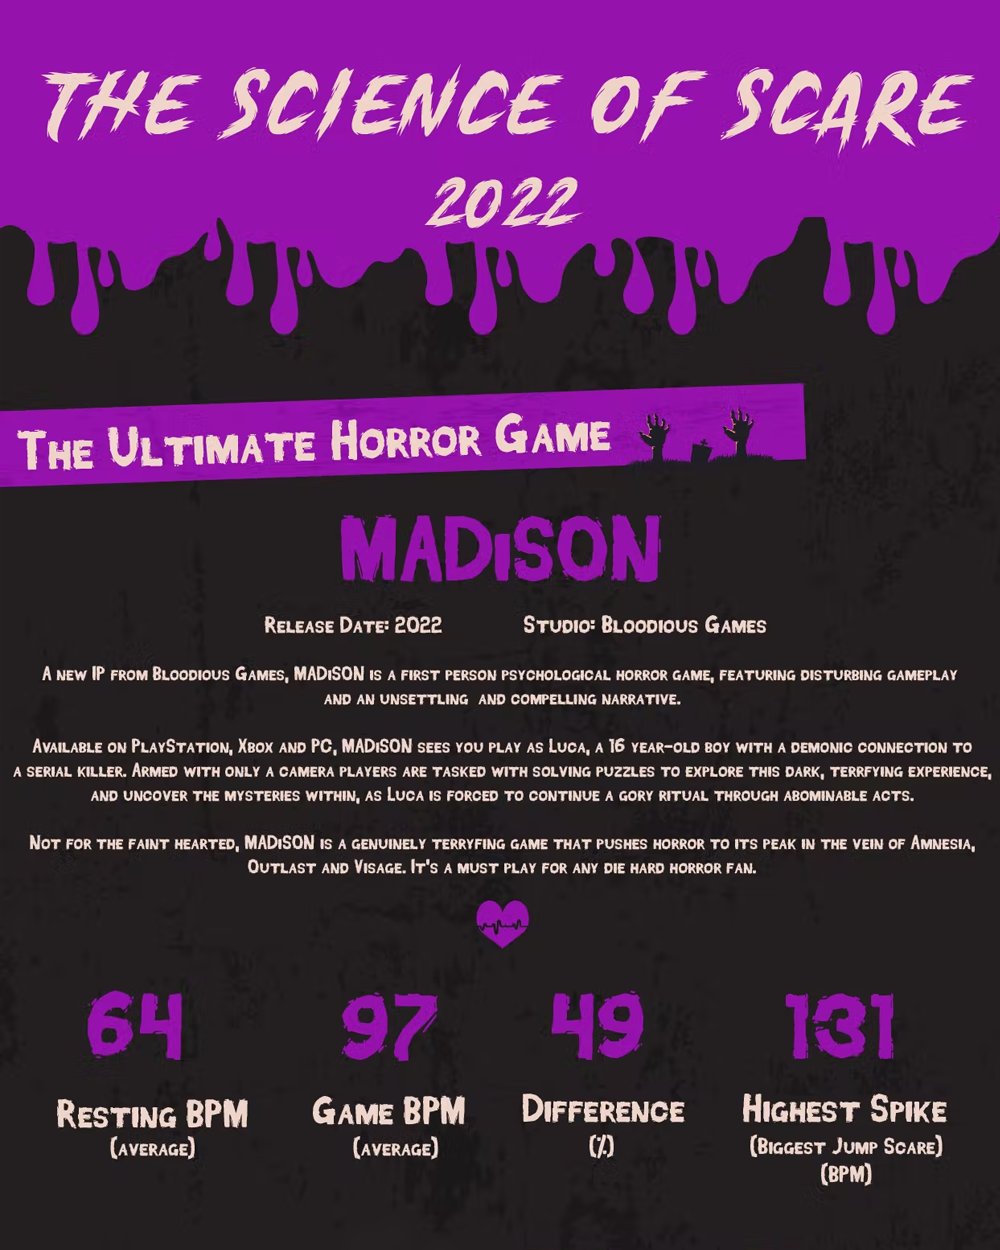 Rely On Horror's 2022 Community Game Of The Year Is…MADiSON - Rely